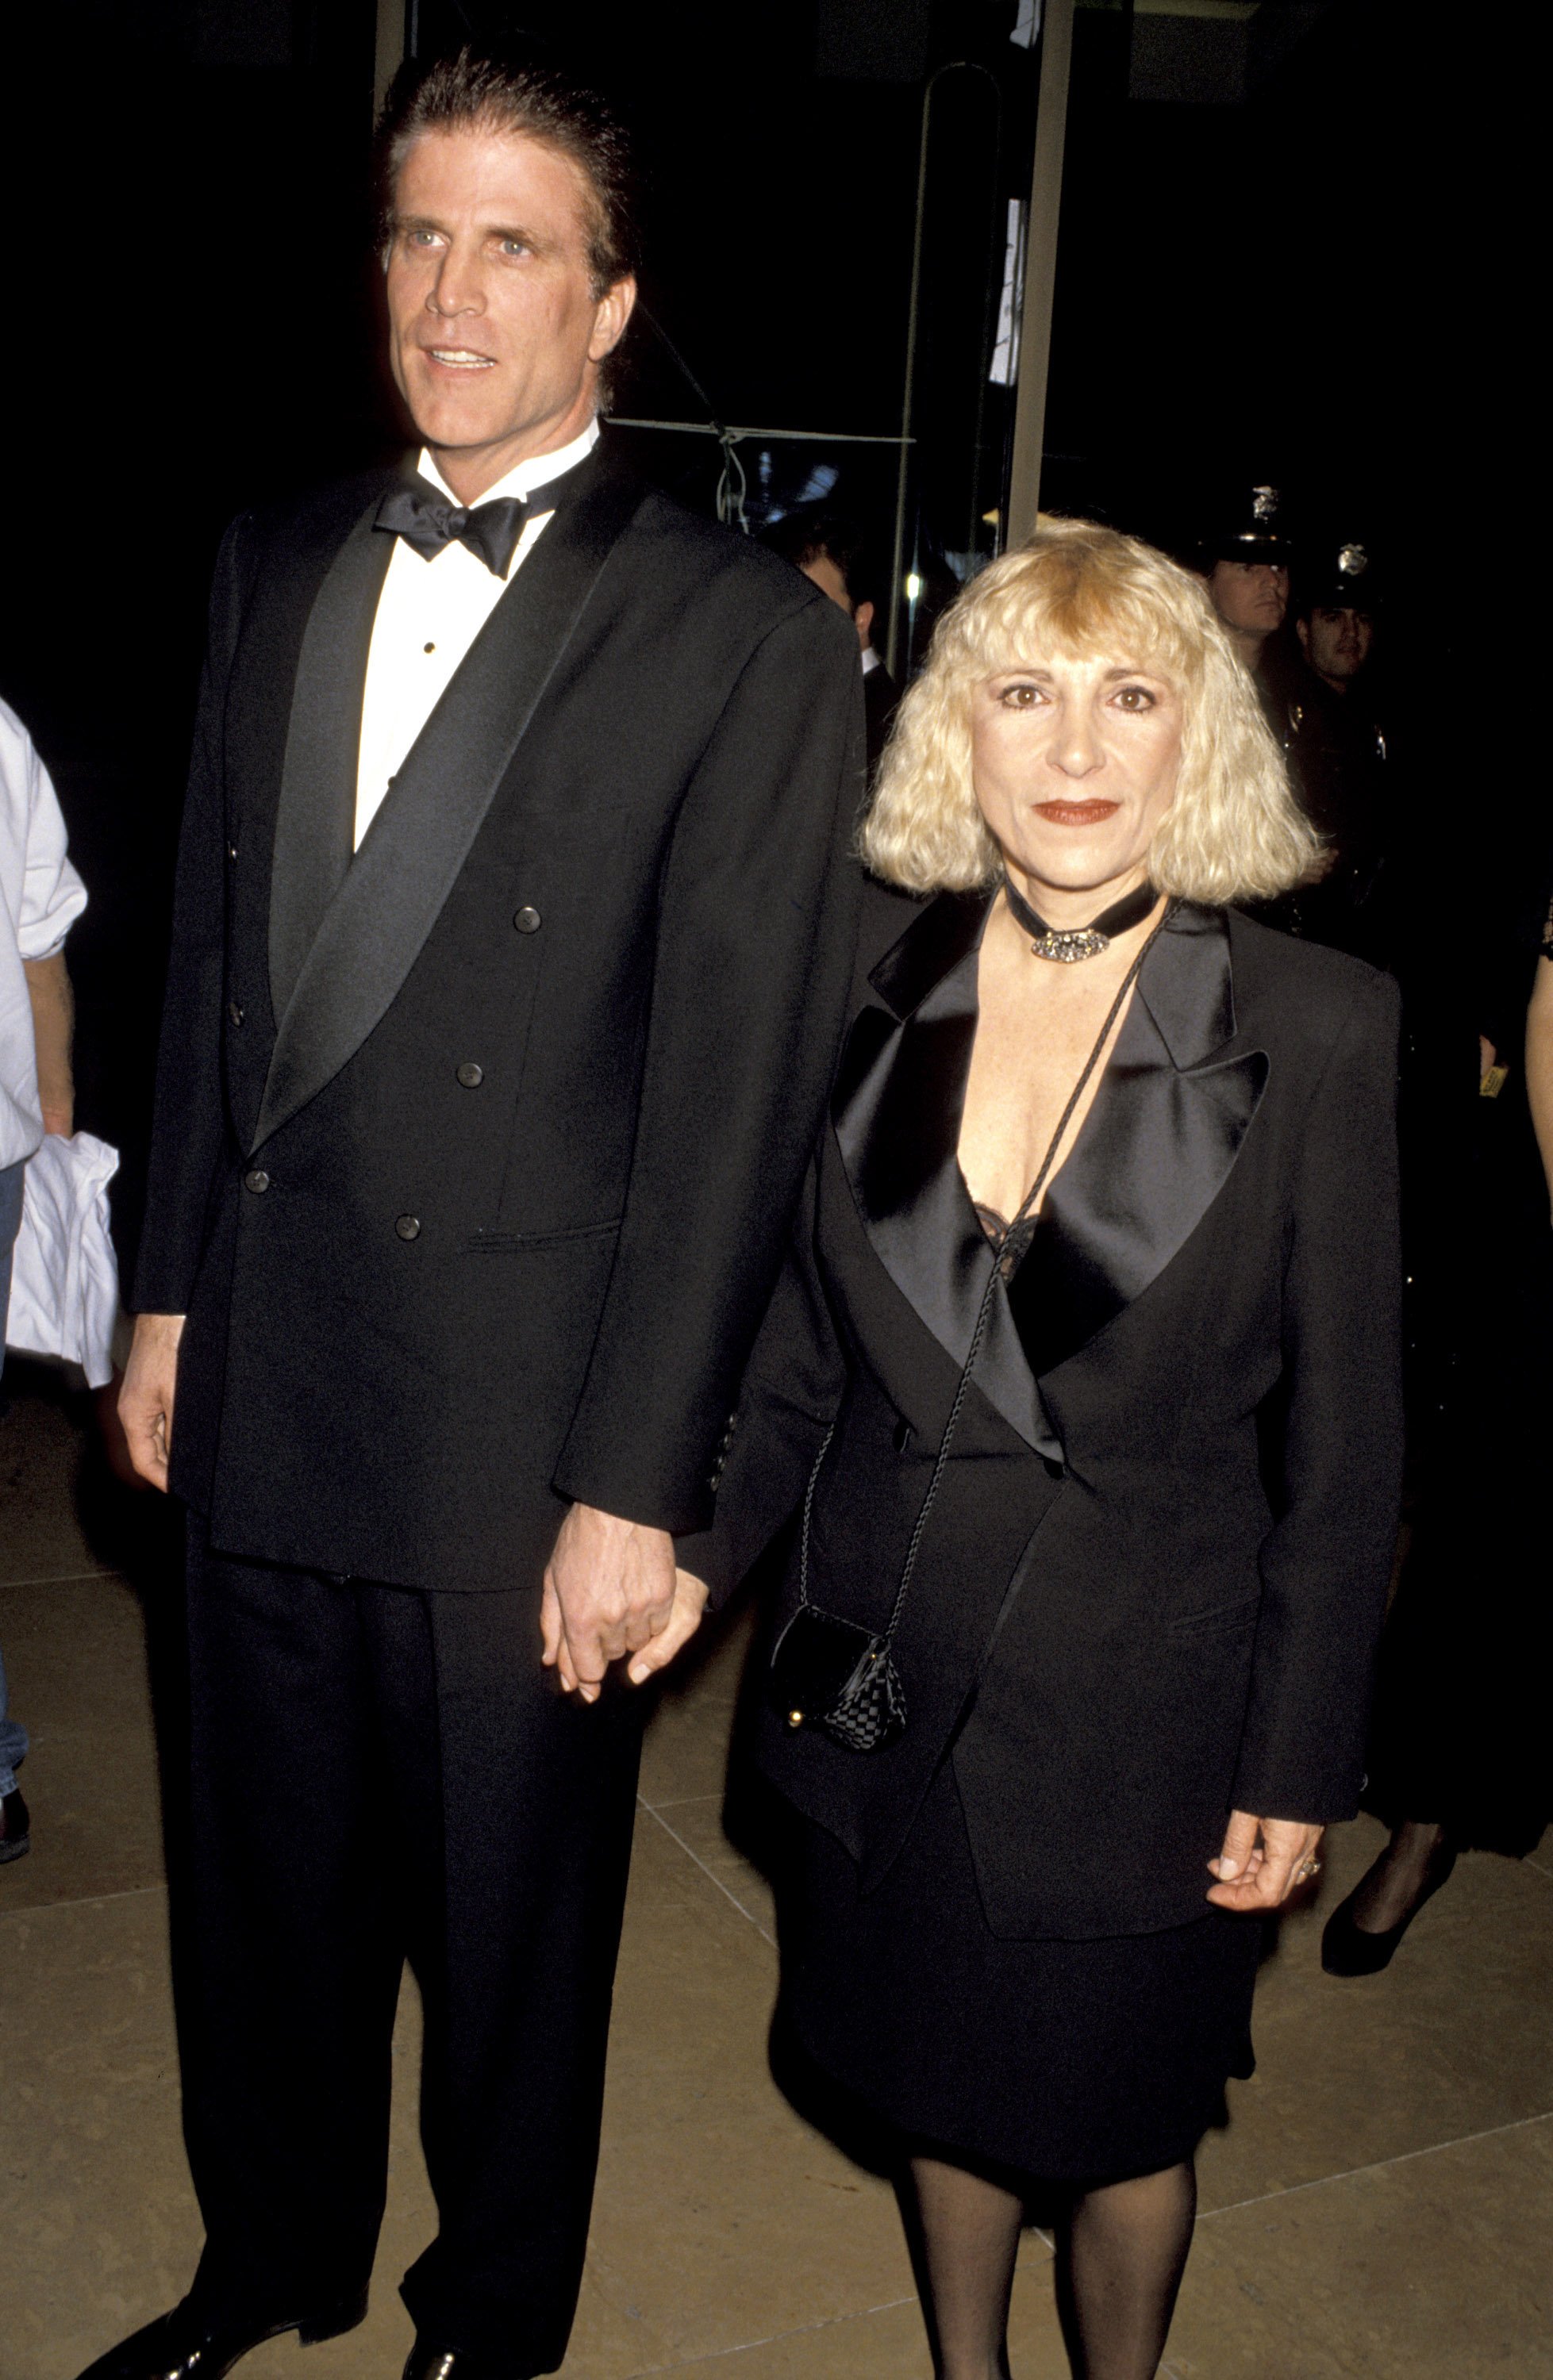 Ted Danson and Casey Coates during the 49th Annual Golden Globe Awards in Beverly Hills, California on January 18, 1992 | Source: Getty Images